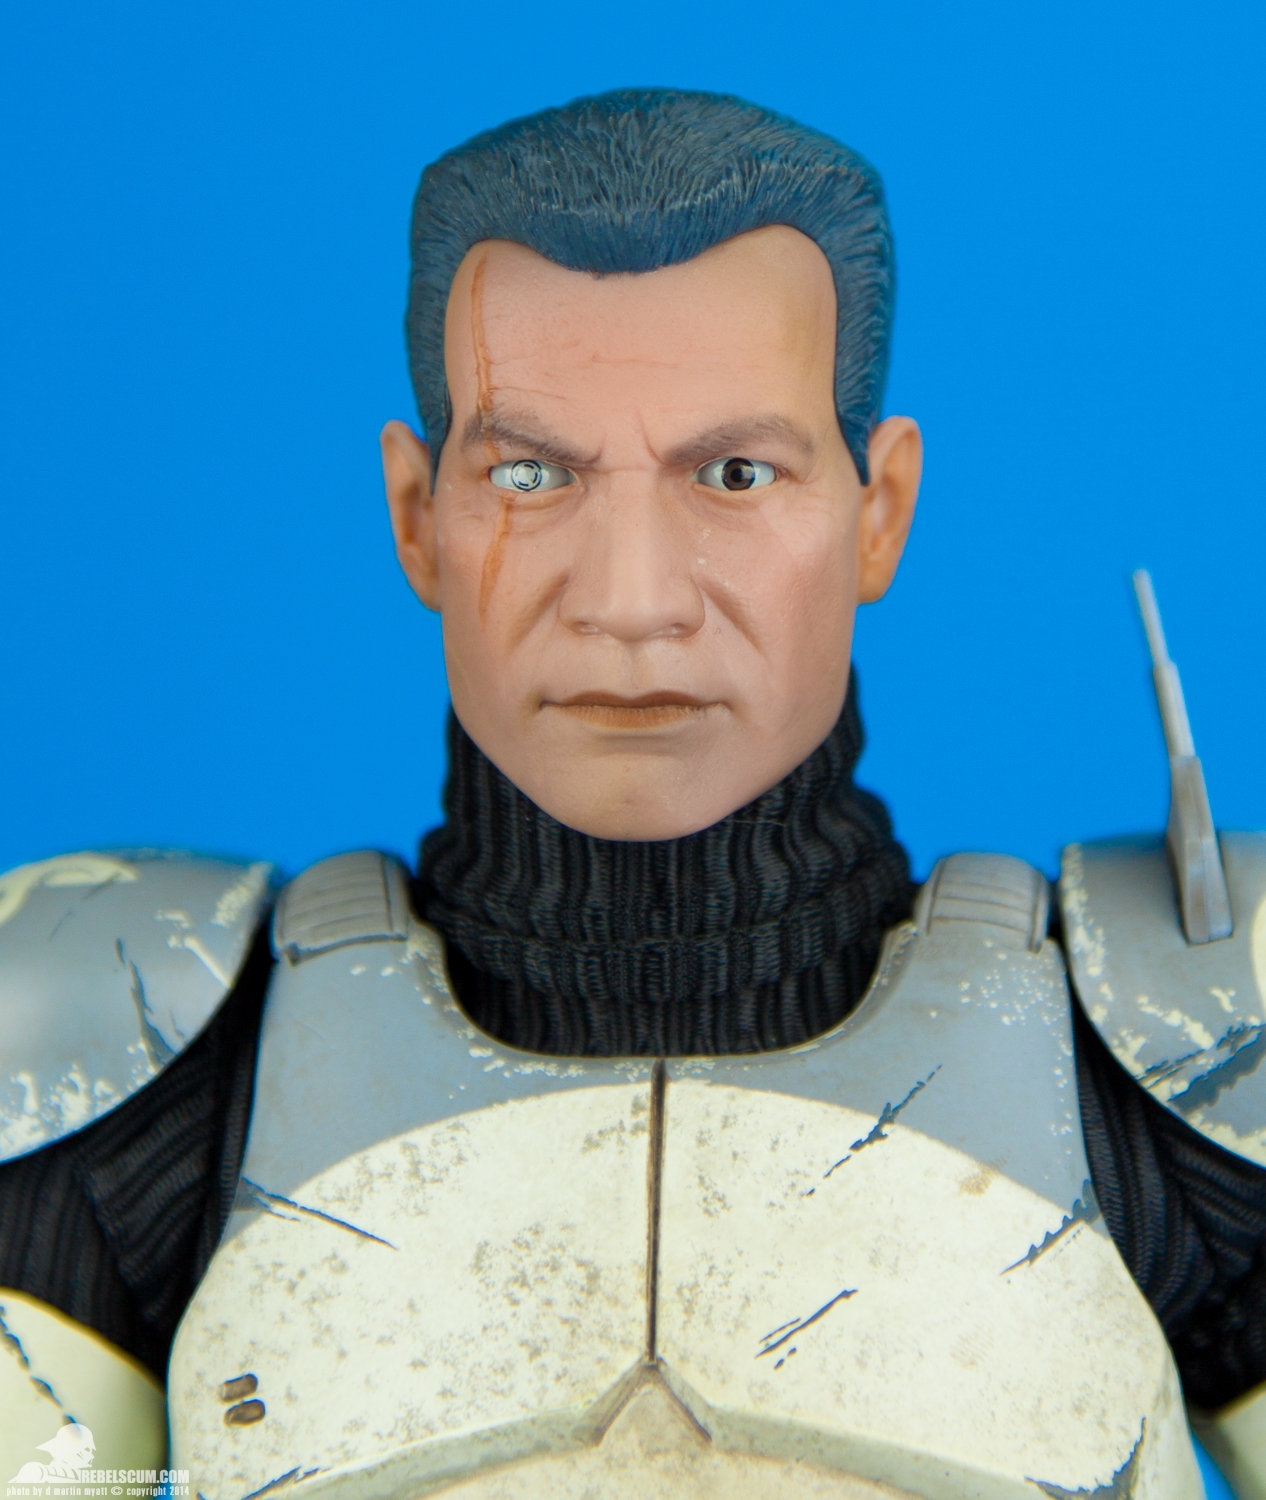 Clone-Commander-Wolffe-Sixth-Scale-Sideshow-Collectibles-015.jpg